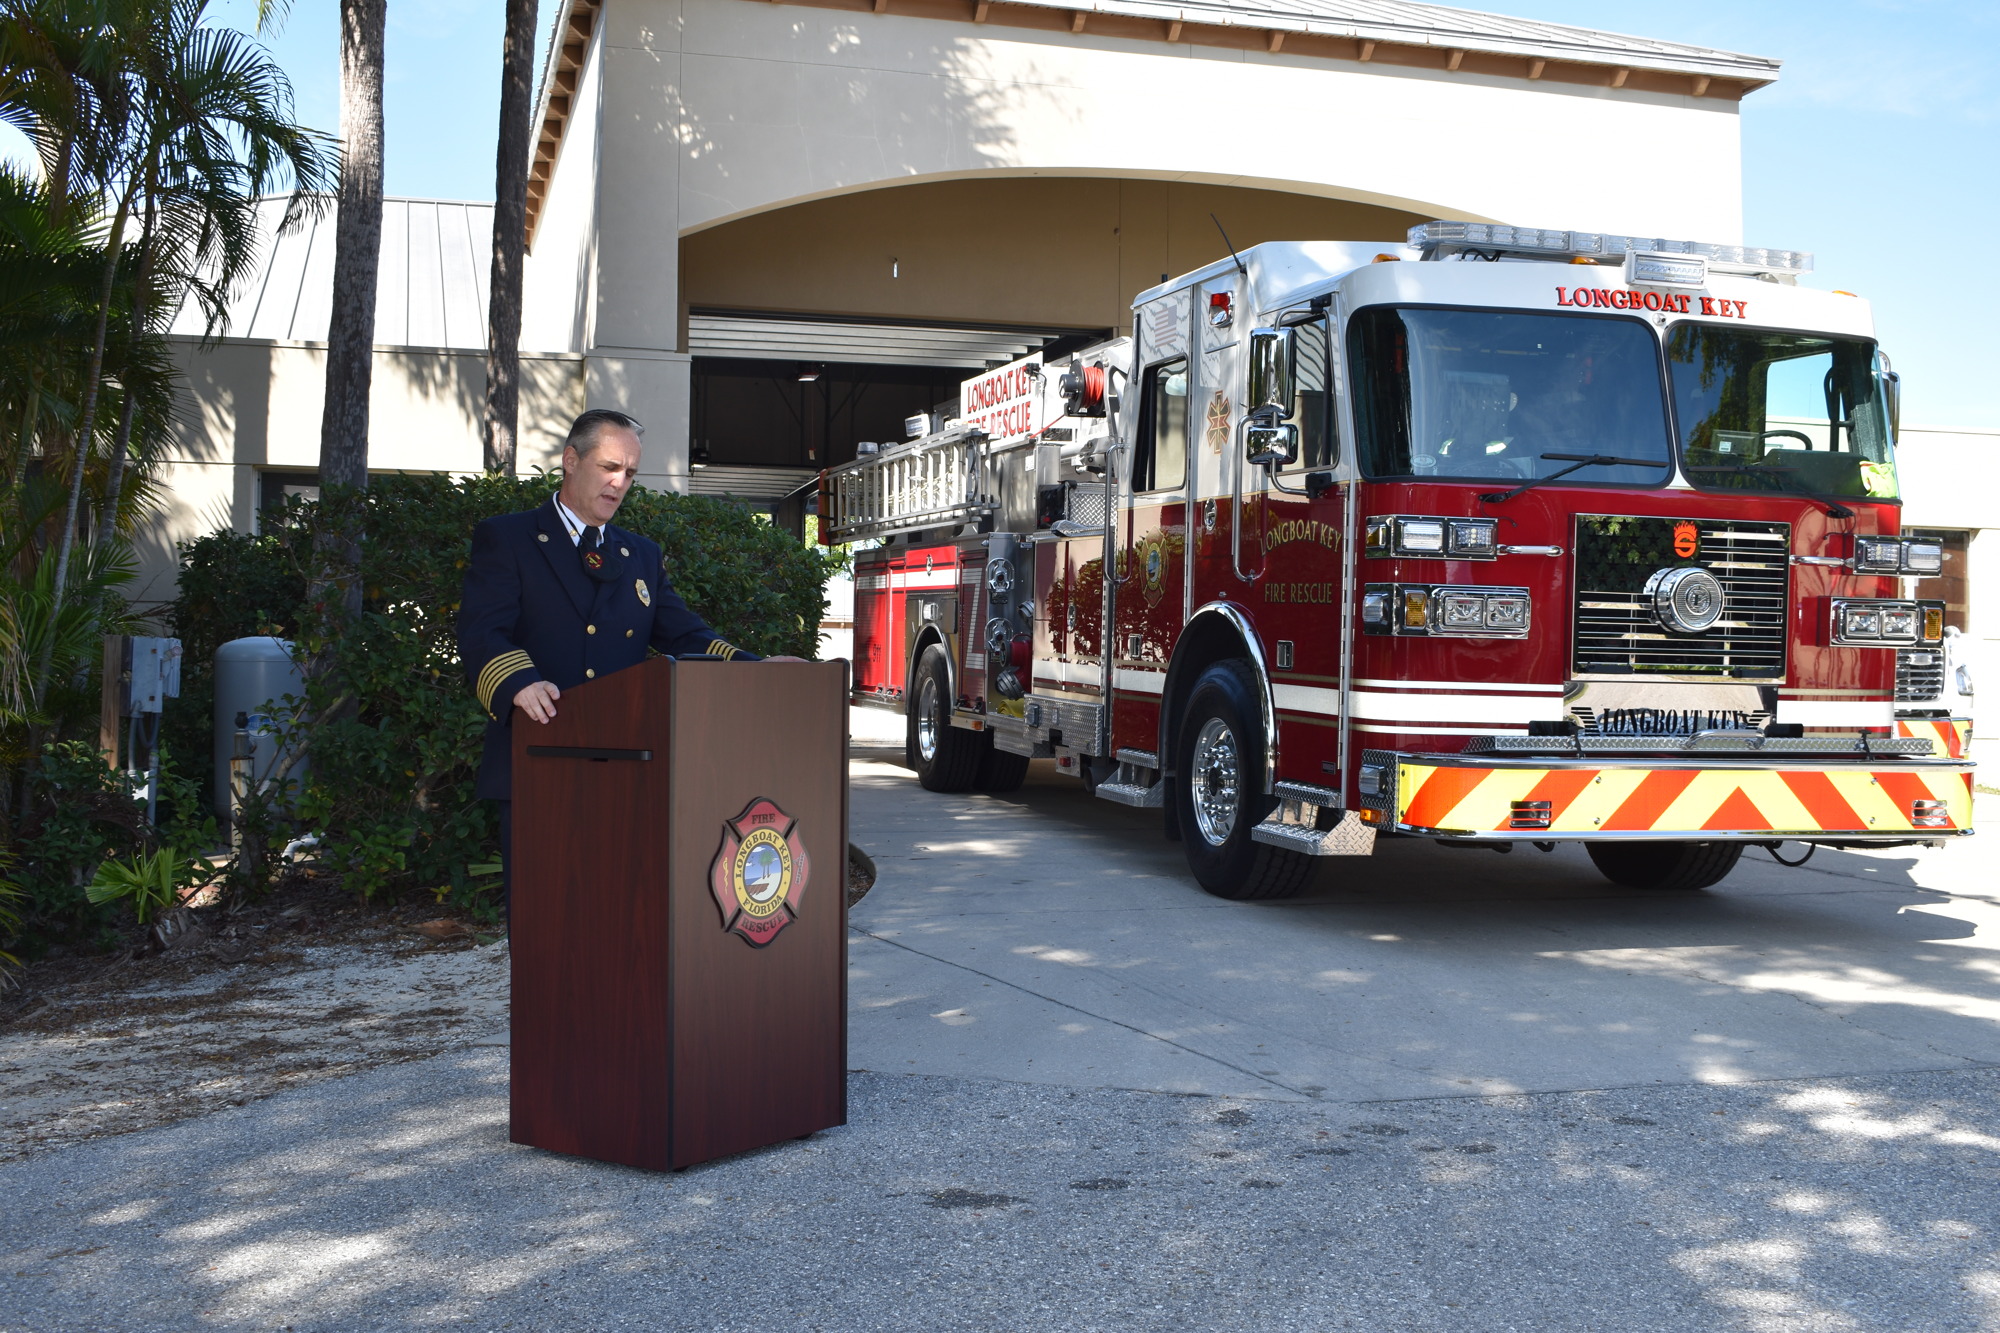 The Longboat Key Fire Rescue Department is due to receive a new fire truck in fiscal year 2025. File photo